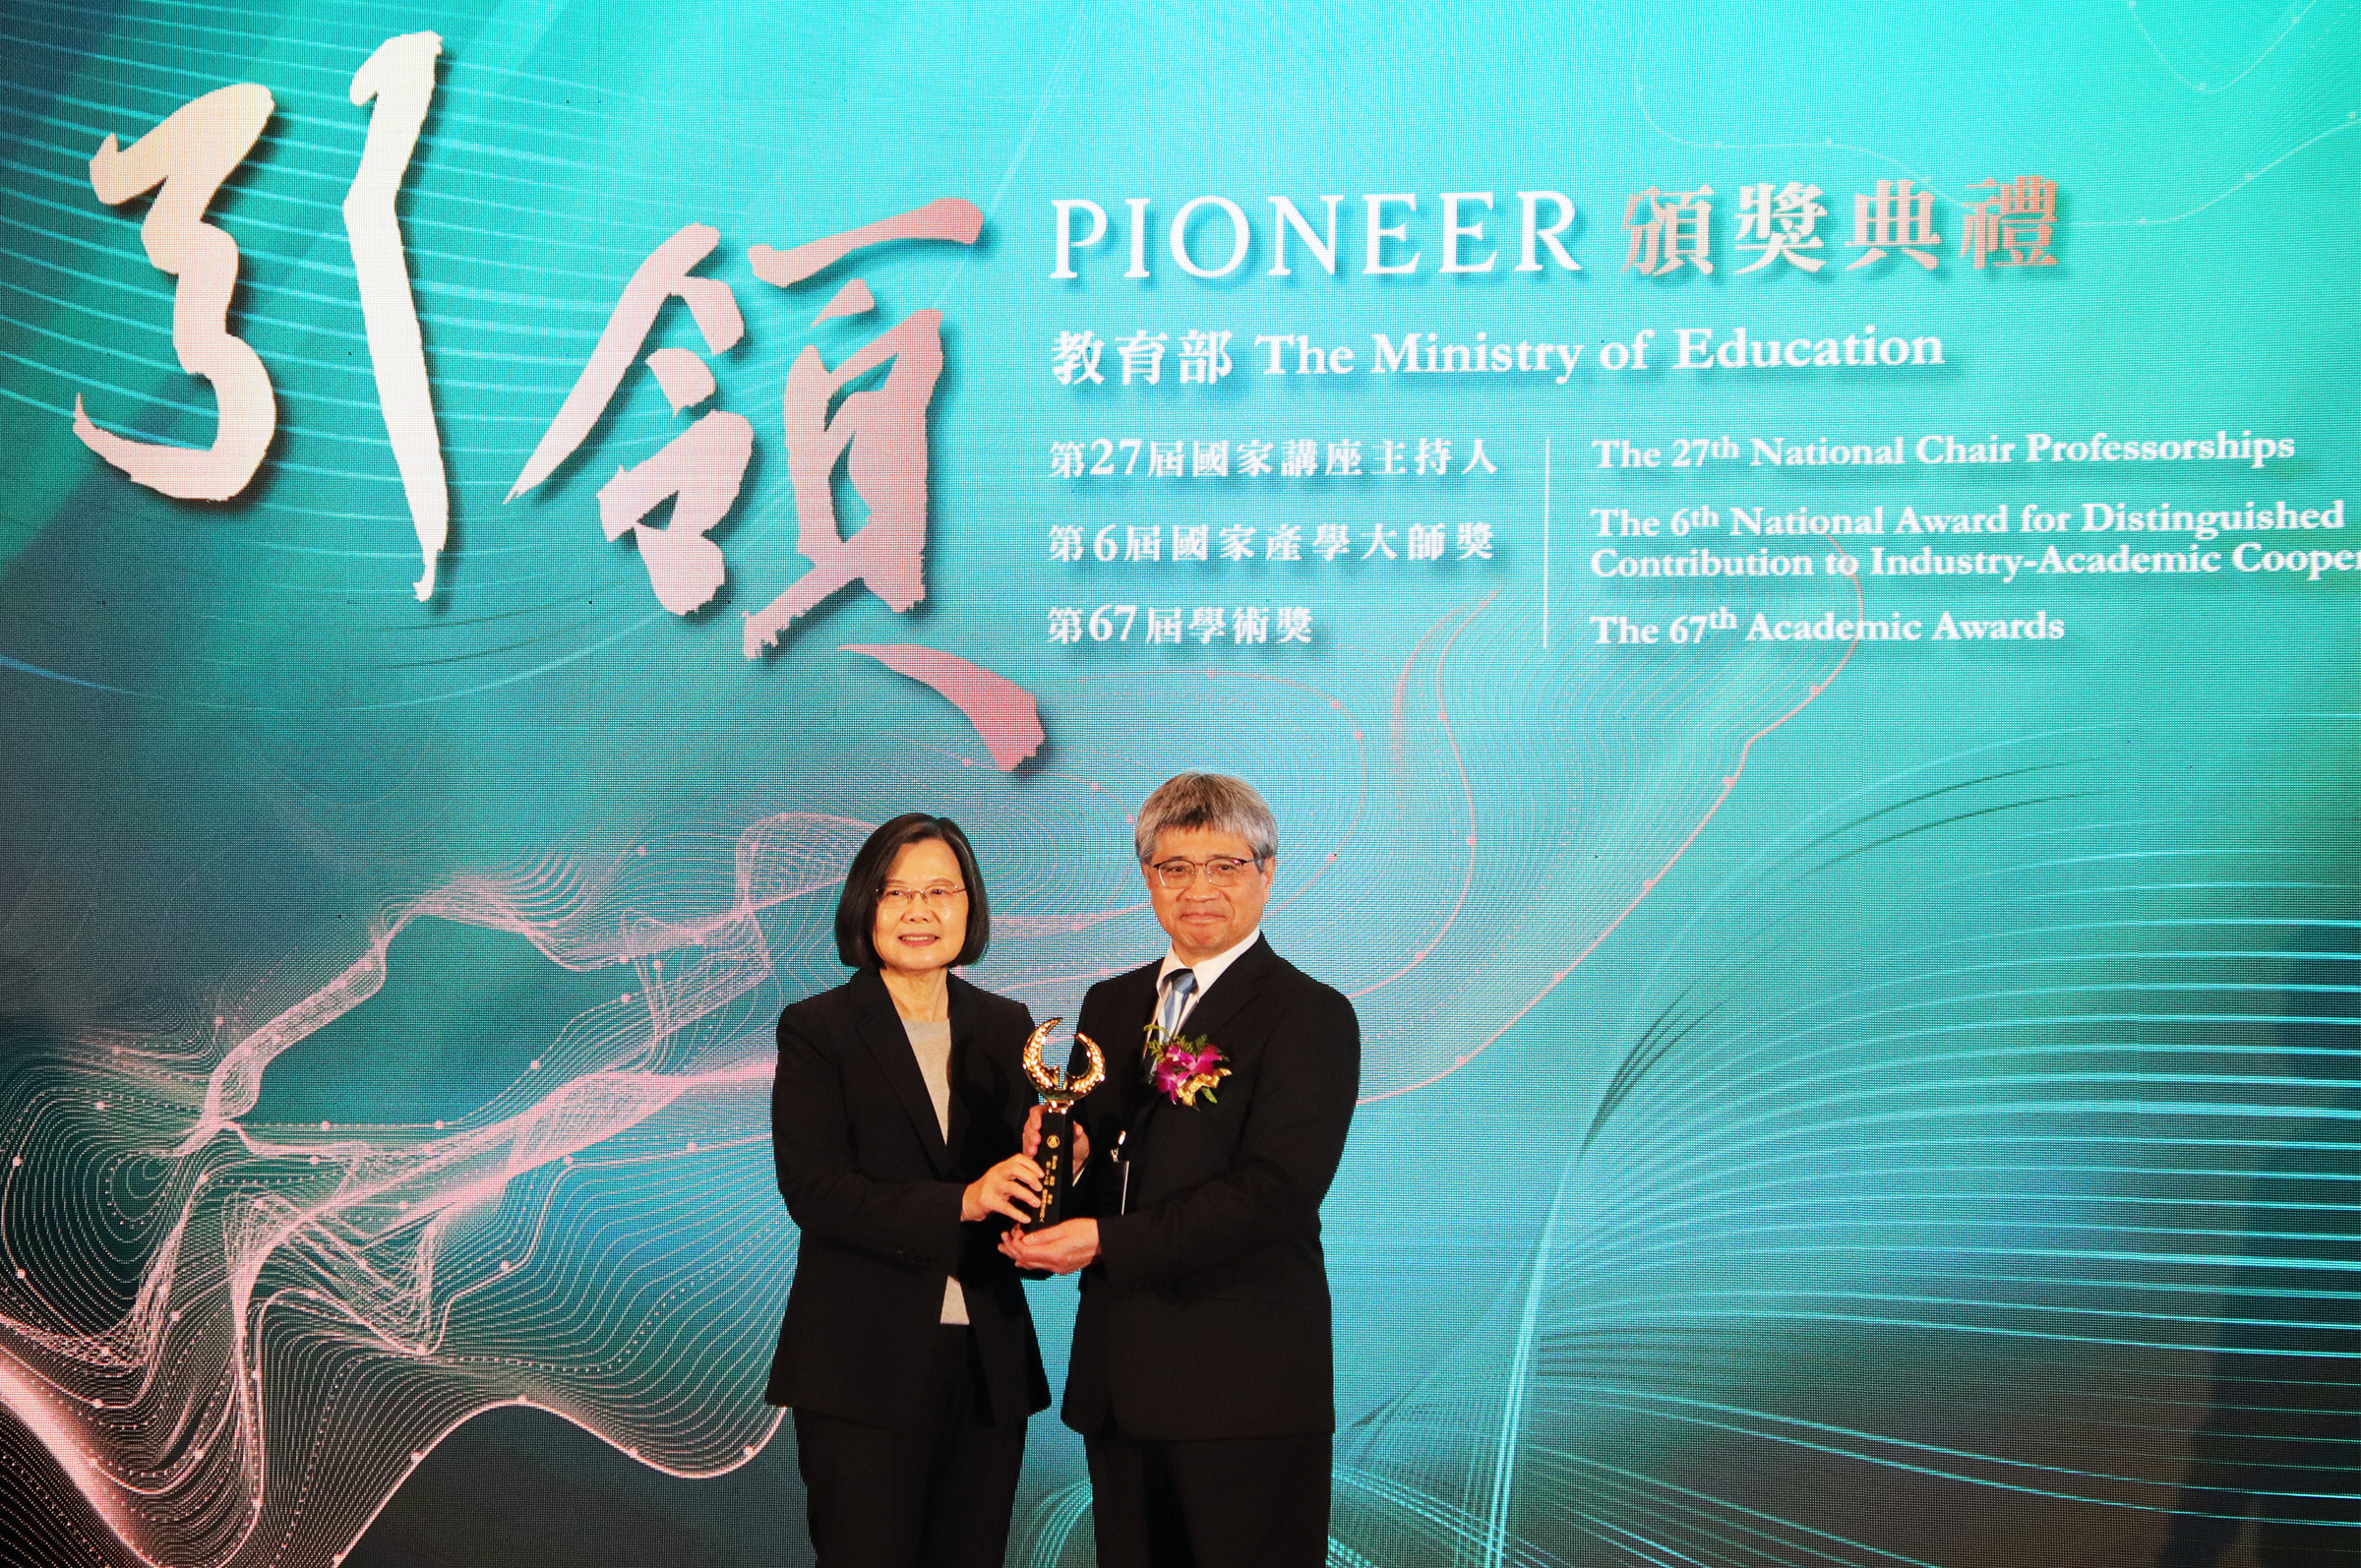 Professor Liu Jann-Yeng from the Dept. of Space Science & Engineering was honored with the recognition as the Host of the 27th National Chair by the Ministry of Education. President Tsai Ing-Wen personally awarded him the honor. Photo by Chen Ju-Chih